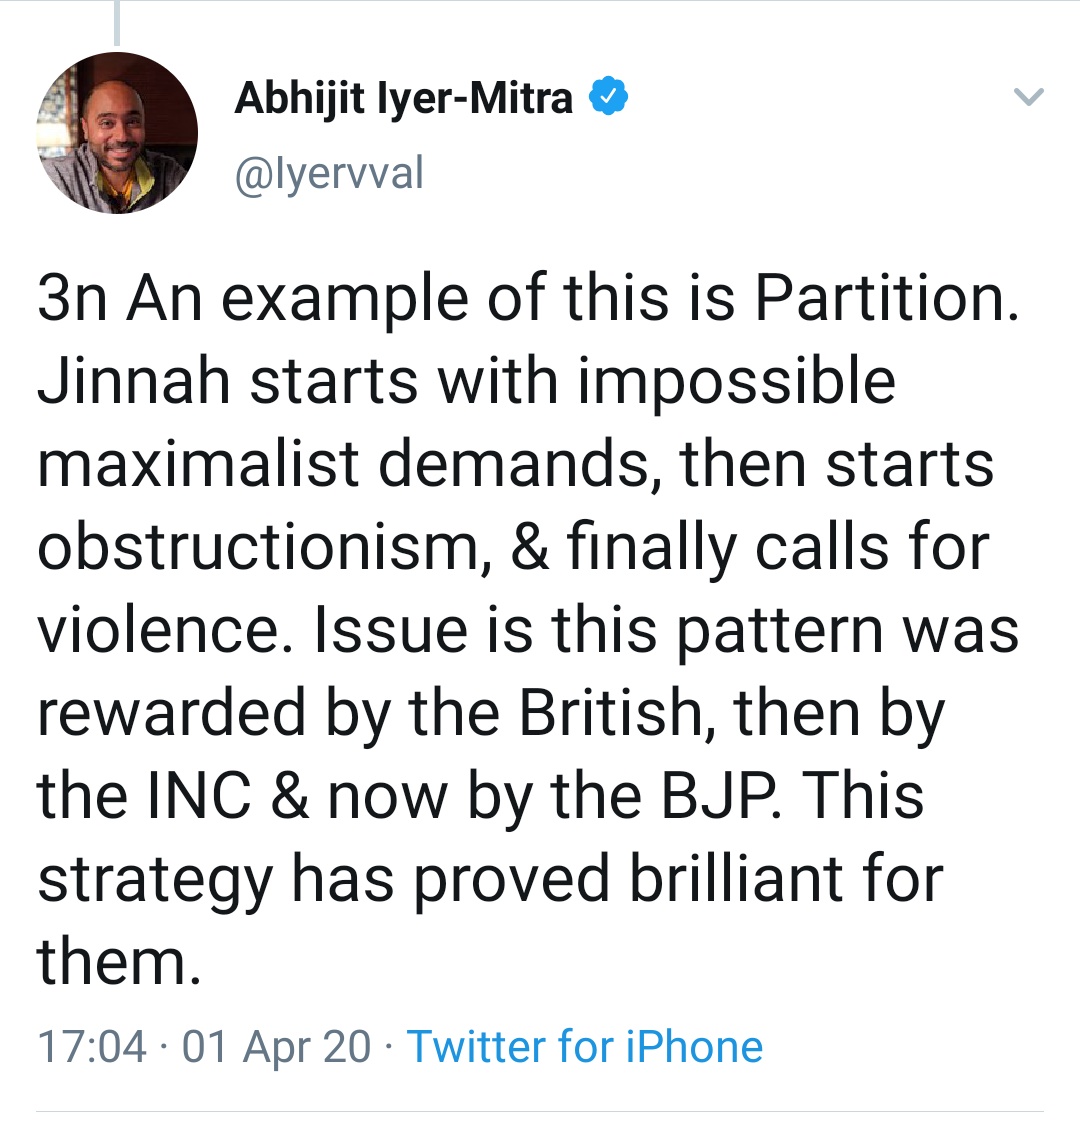 4/To further fool his idiot fanboys- he throws in dates and events - partition, 1857 et al. Sounds so bright, no! Acc to him, for 150+ years to1857 since mughals weakened to further 150+ till now, there's one monolithic aspiration - to strike an evil bargain.